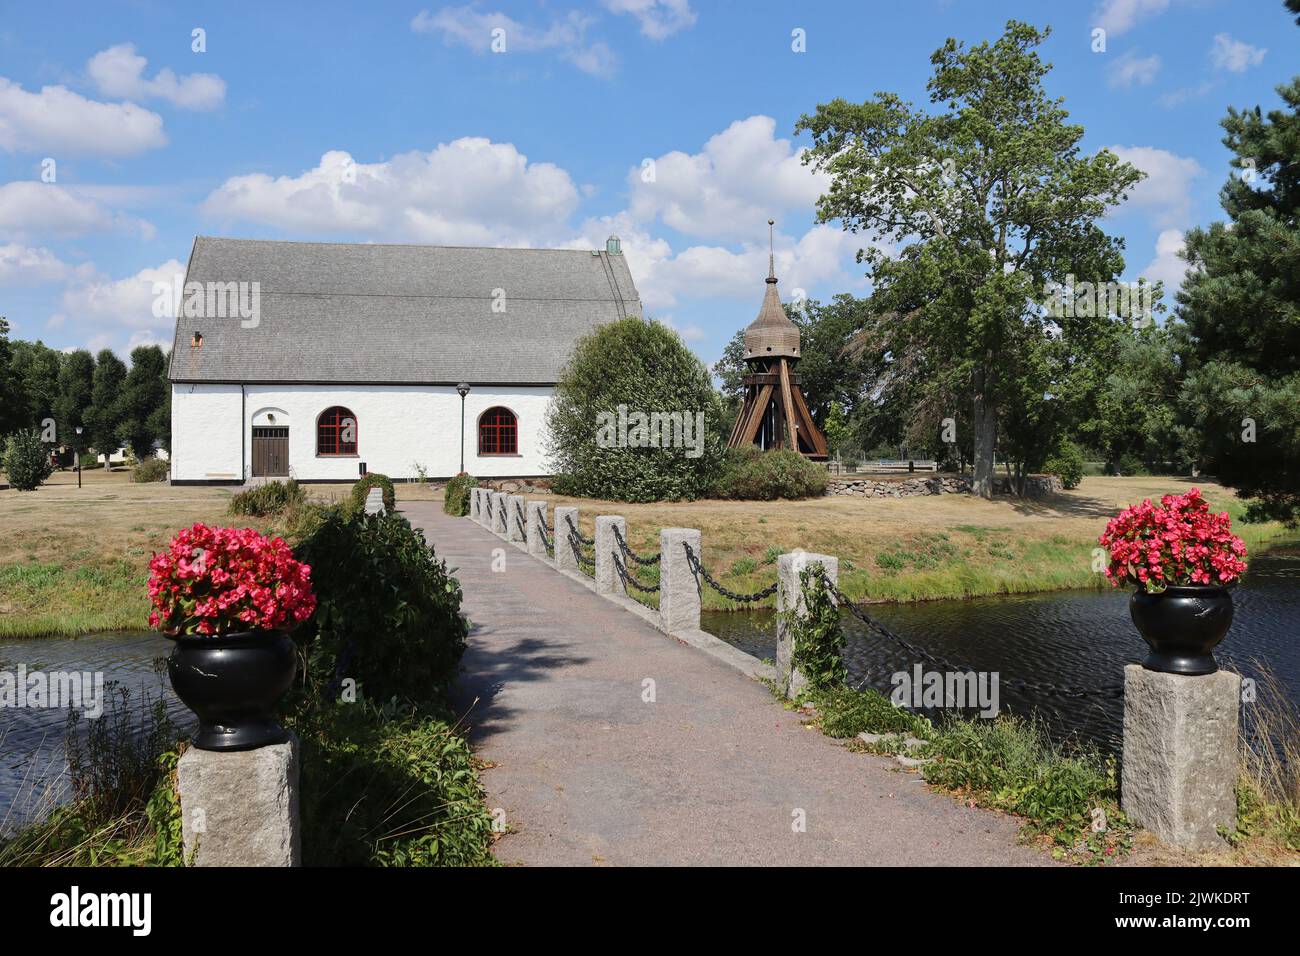 The 18th century church and bell tower of Vissefjärda, in the Emmaboda Municipality of Småland in Sweden. Stock Photo